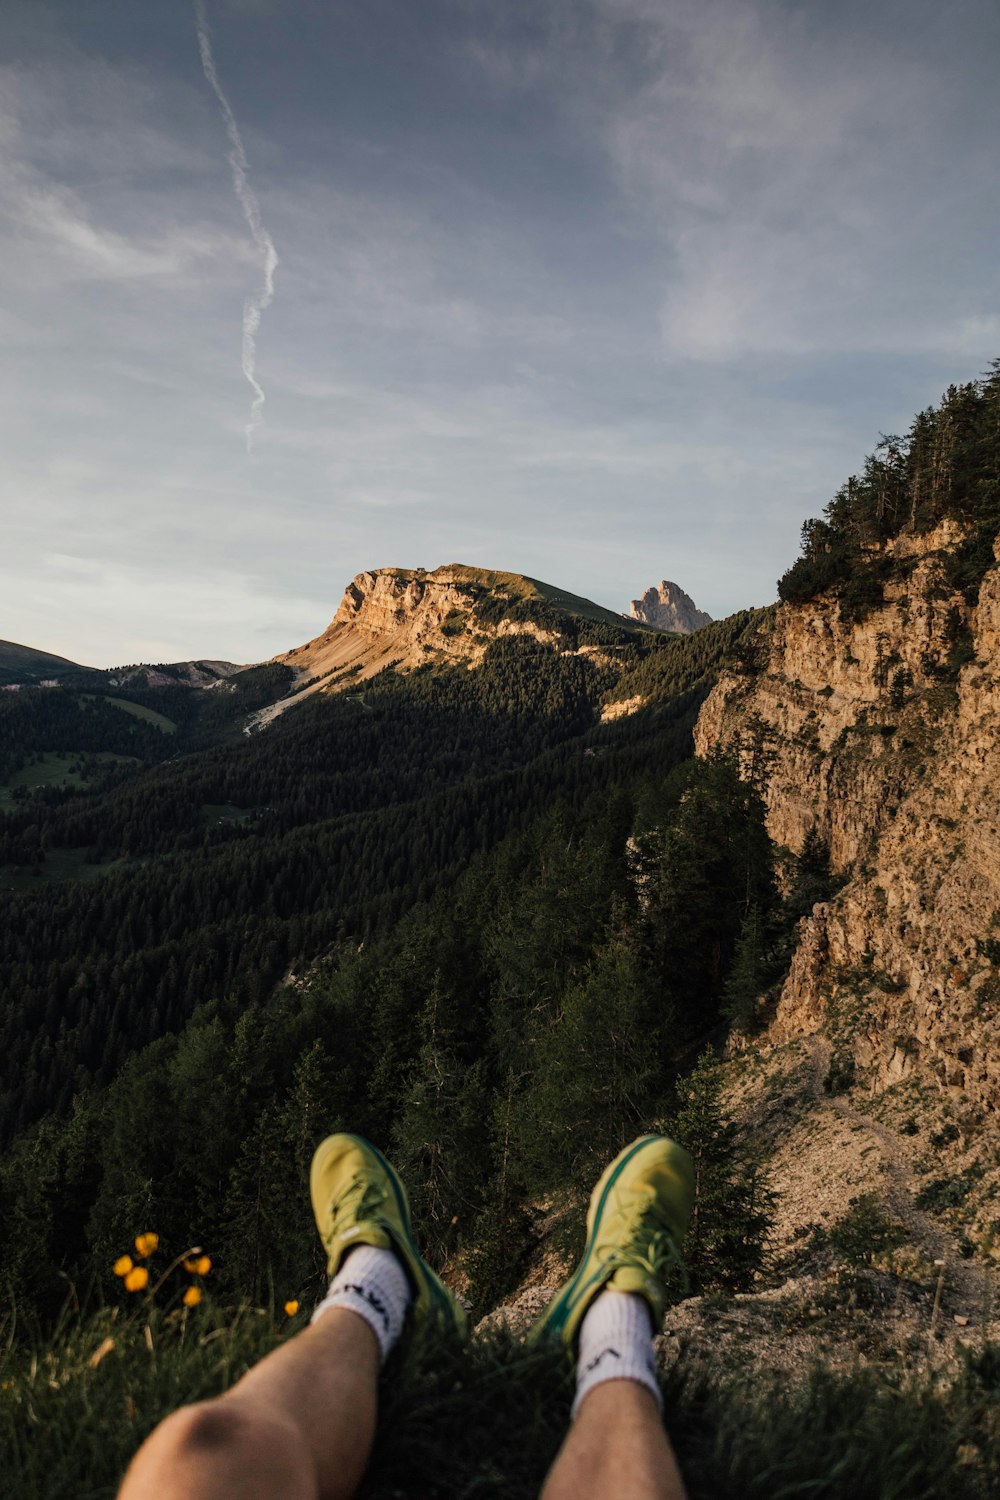 a person's legs and feet on a rock ledge with a mountain in the background